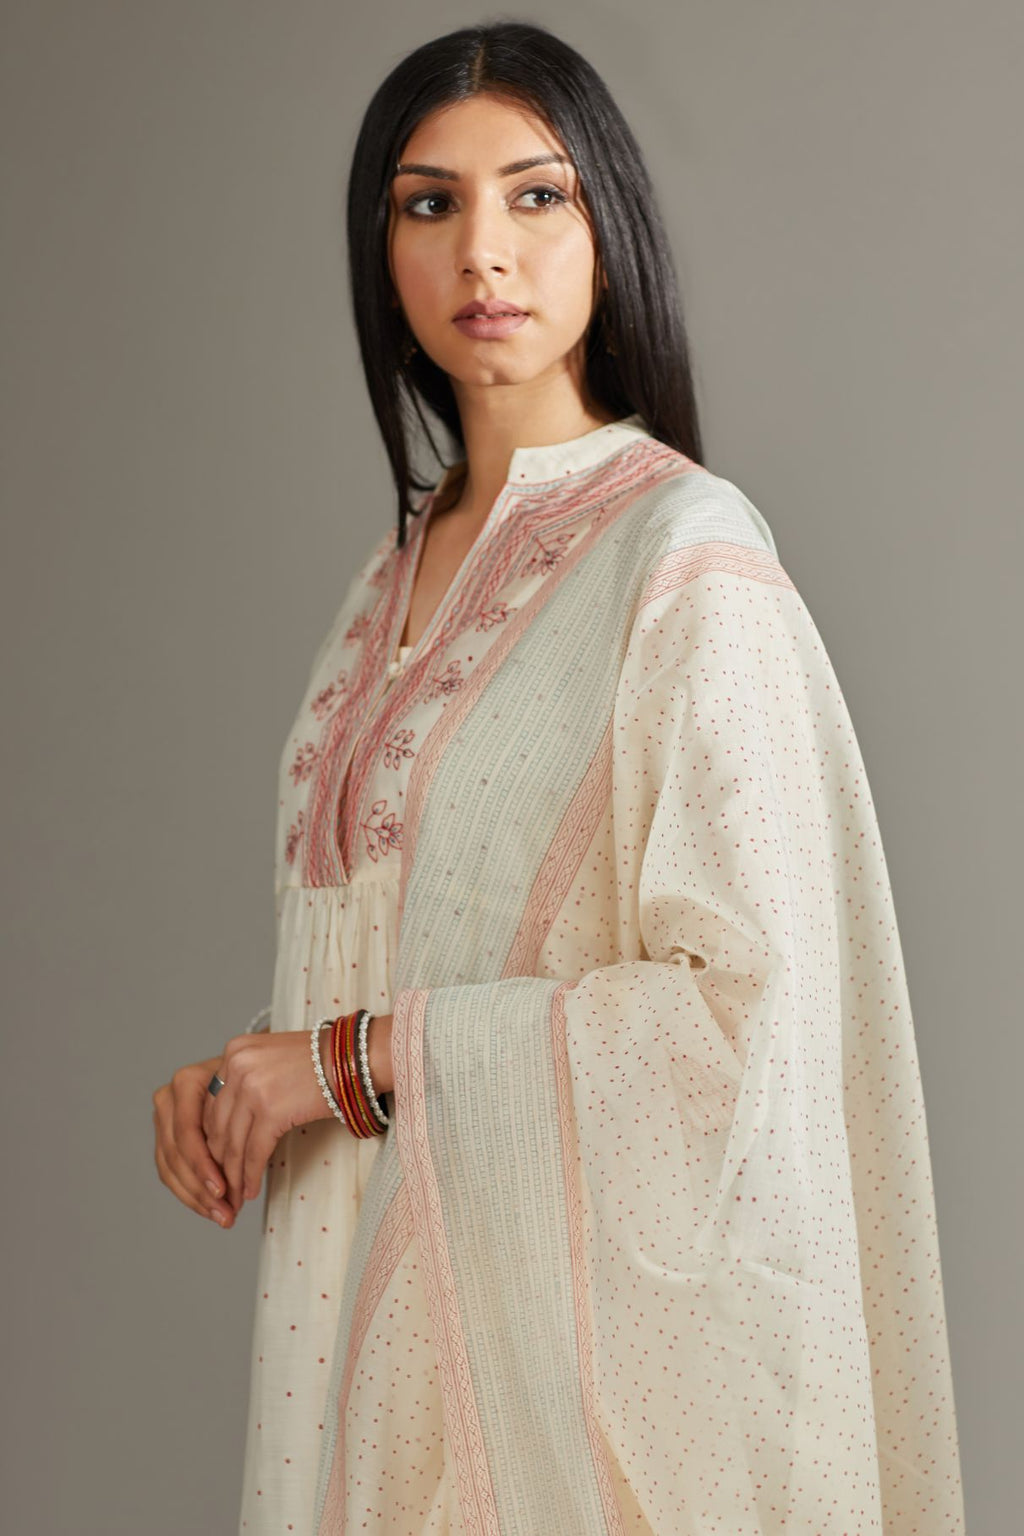 Hand block printed kurta set detailed with quilted embroidery.